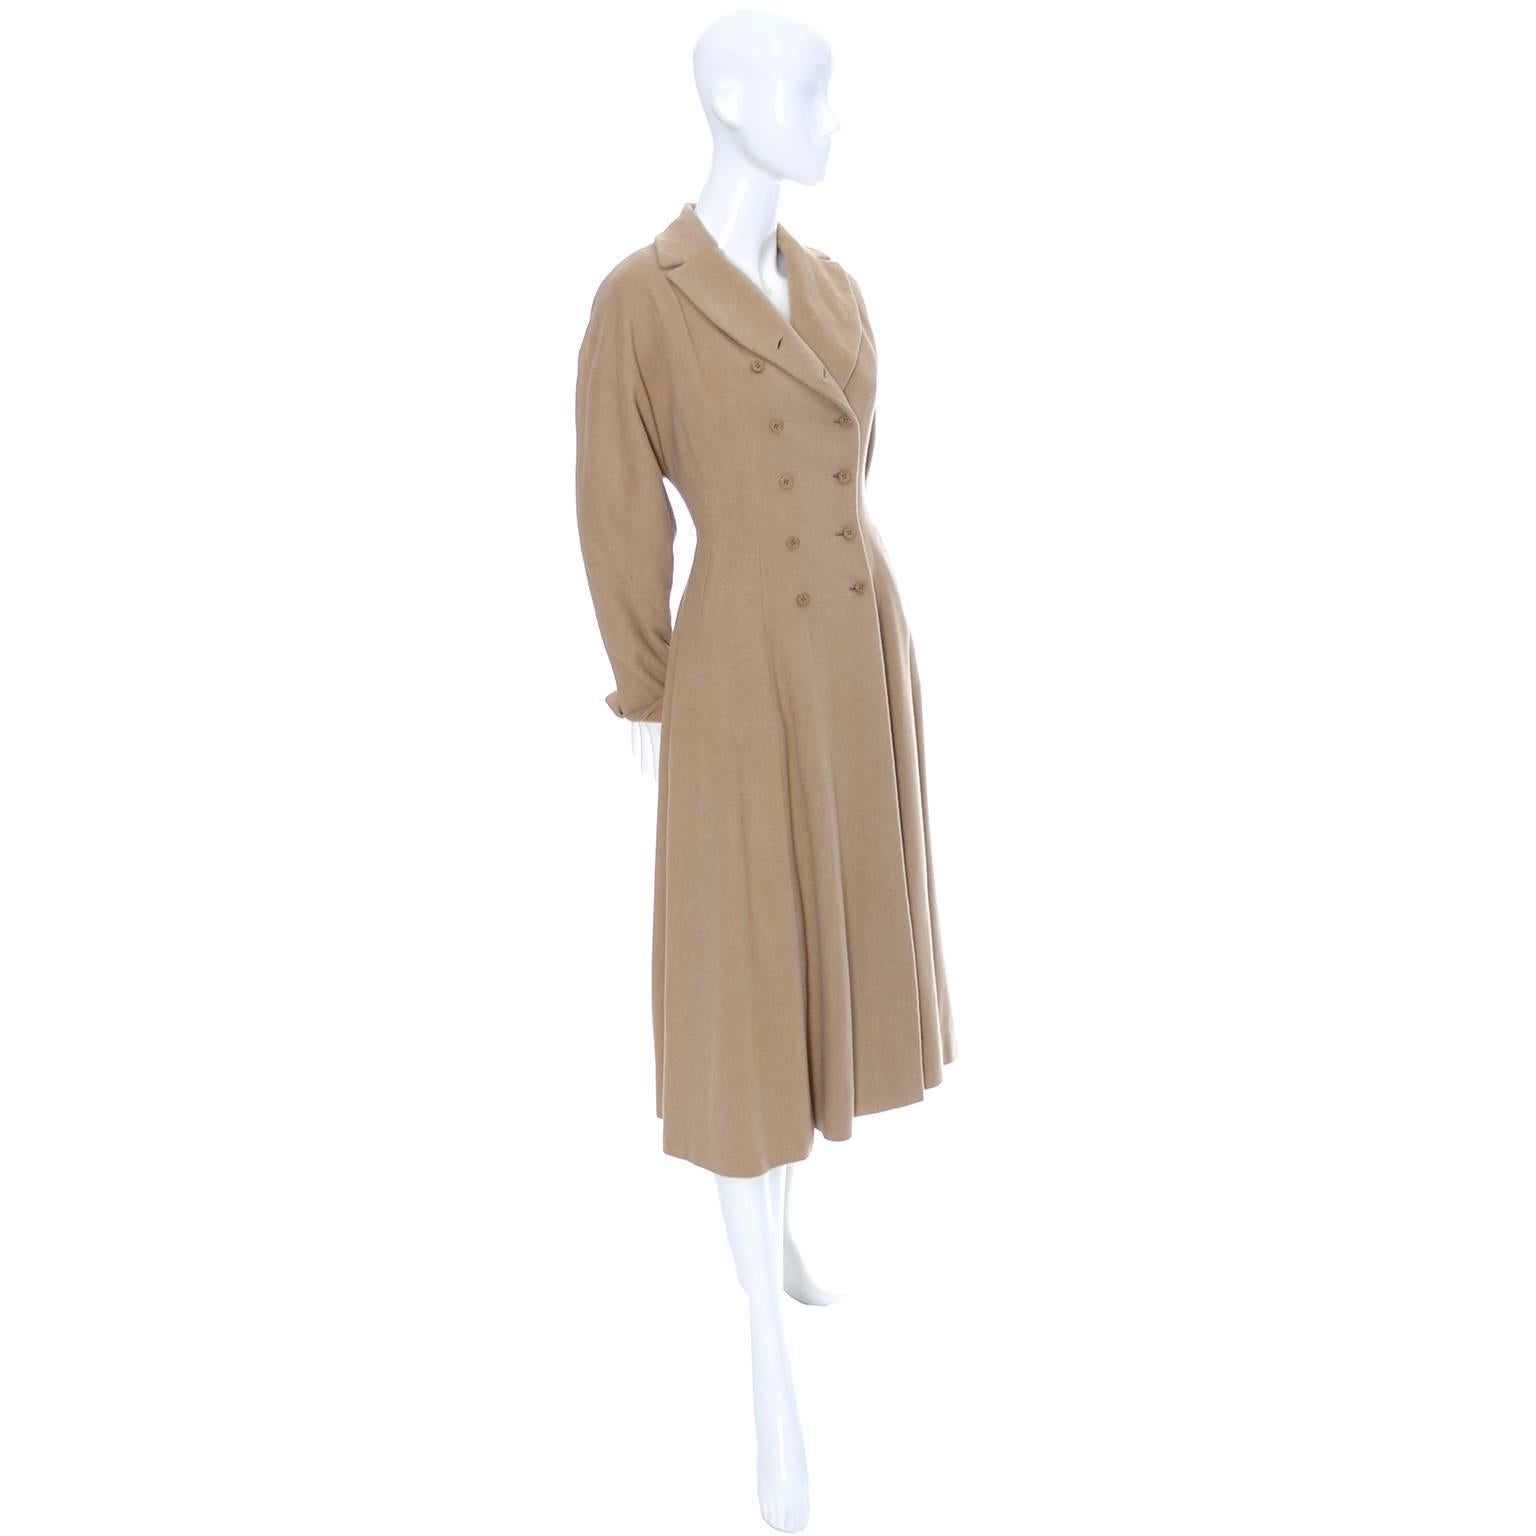 This is an exquisite, rare vintage 1940's coat from designer Vera Maxwell.  It is in excellent condition and comes from a prominent Northwest estate of high end designer mid century clothing. The coat has a full skirt, fitted waist, dolman sleeves